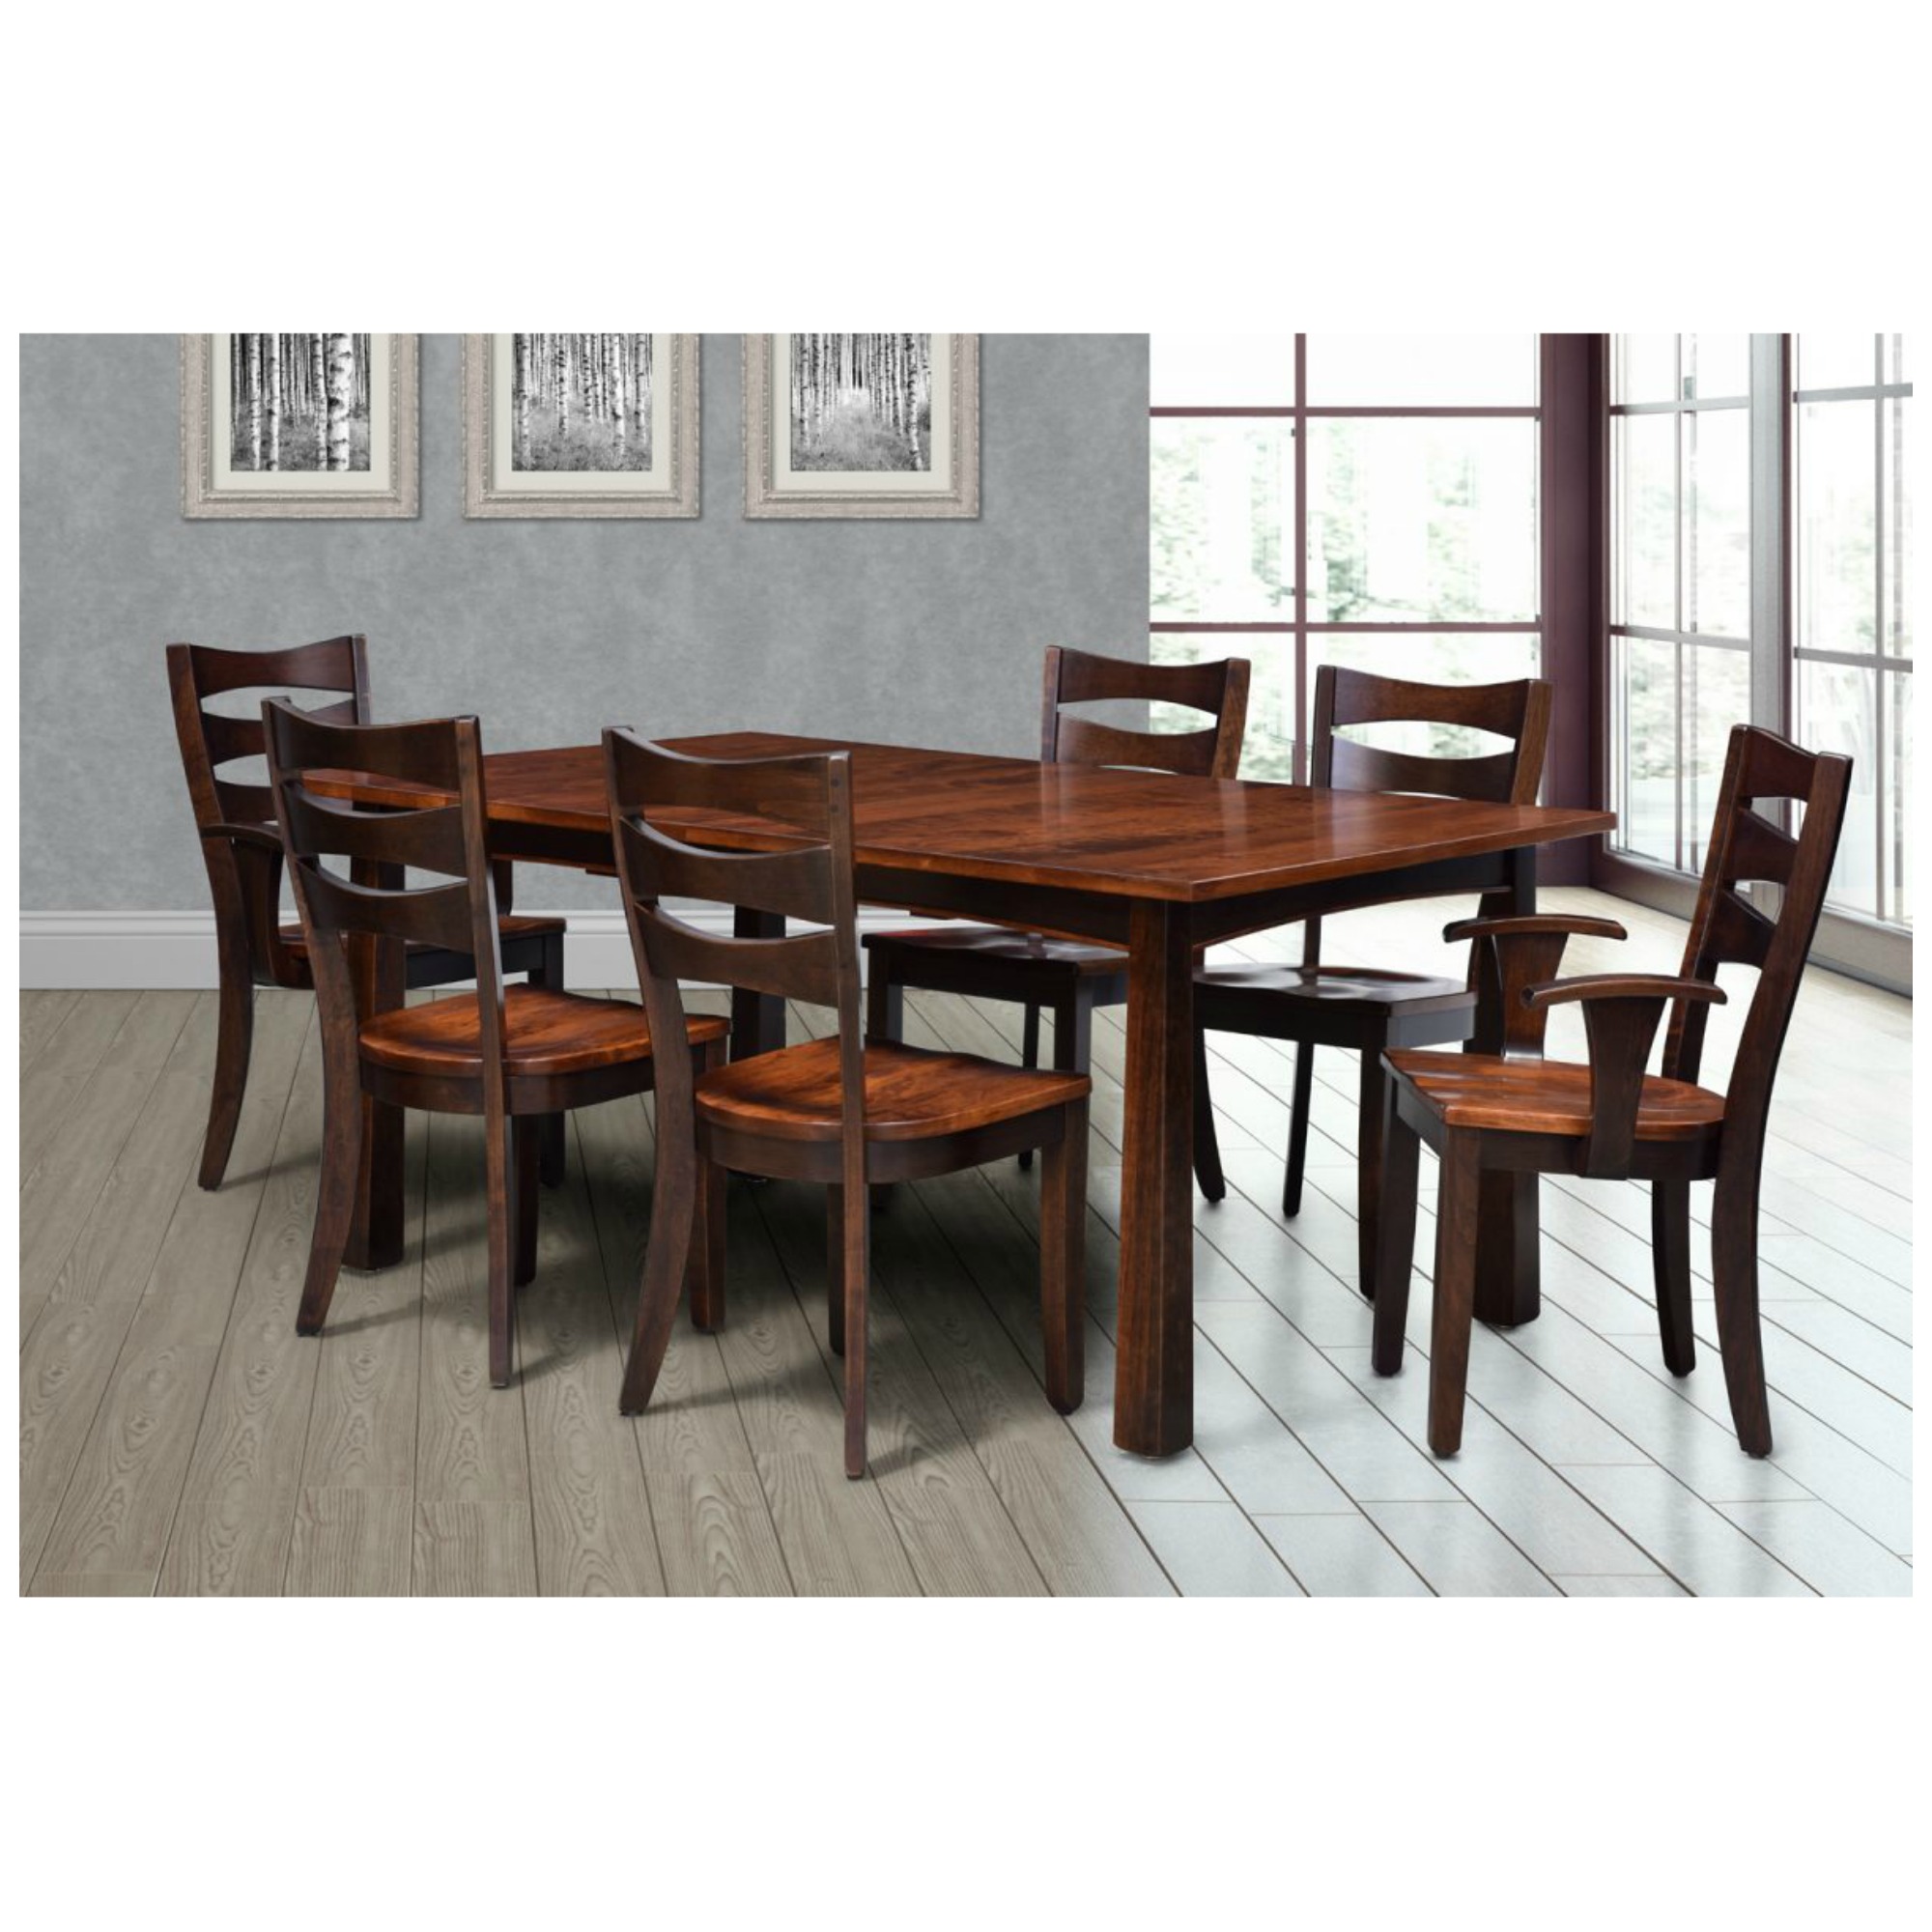 Exeter Dining Collection By Trailway Stewart Roth Furniture